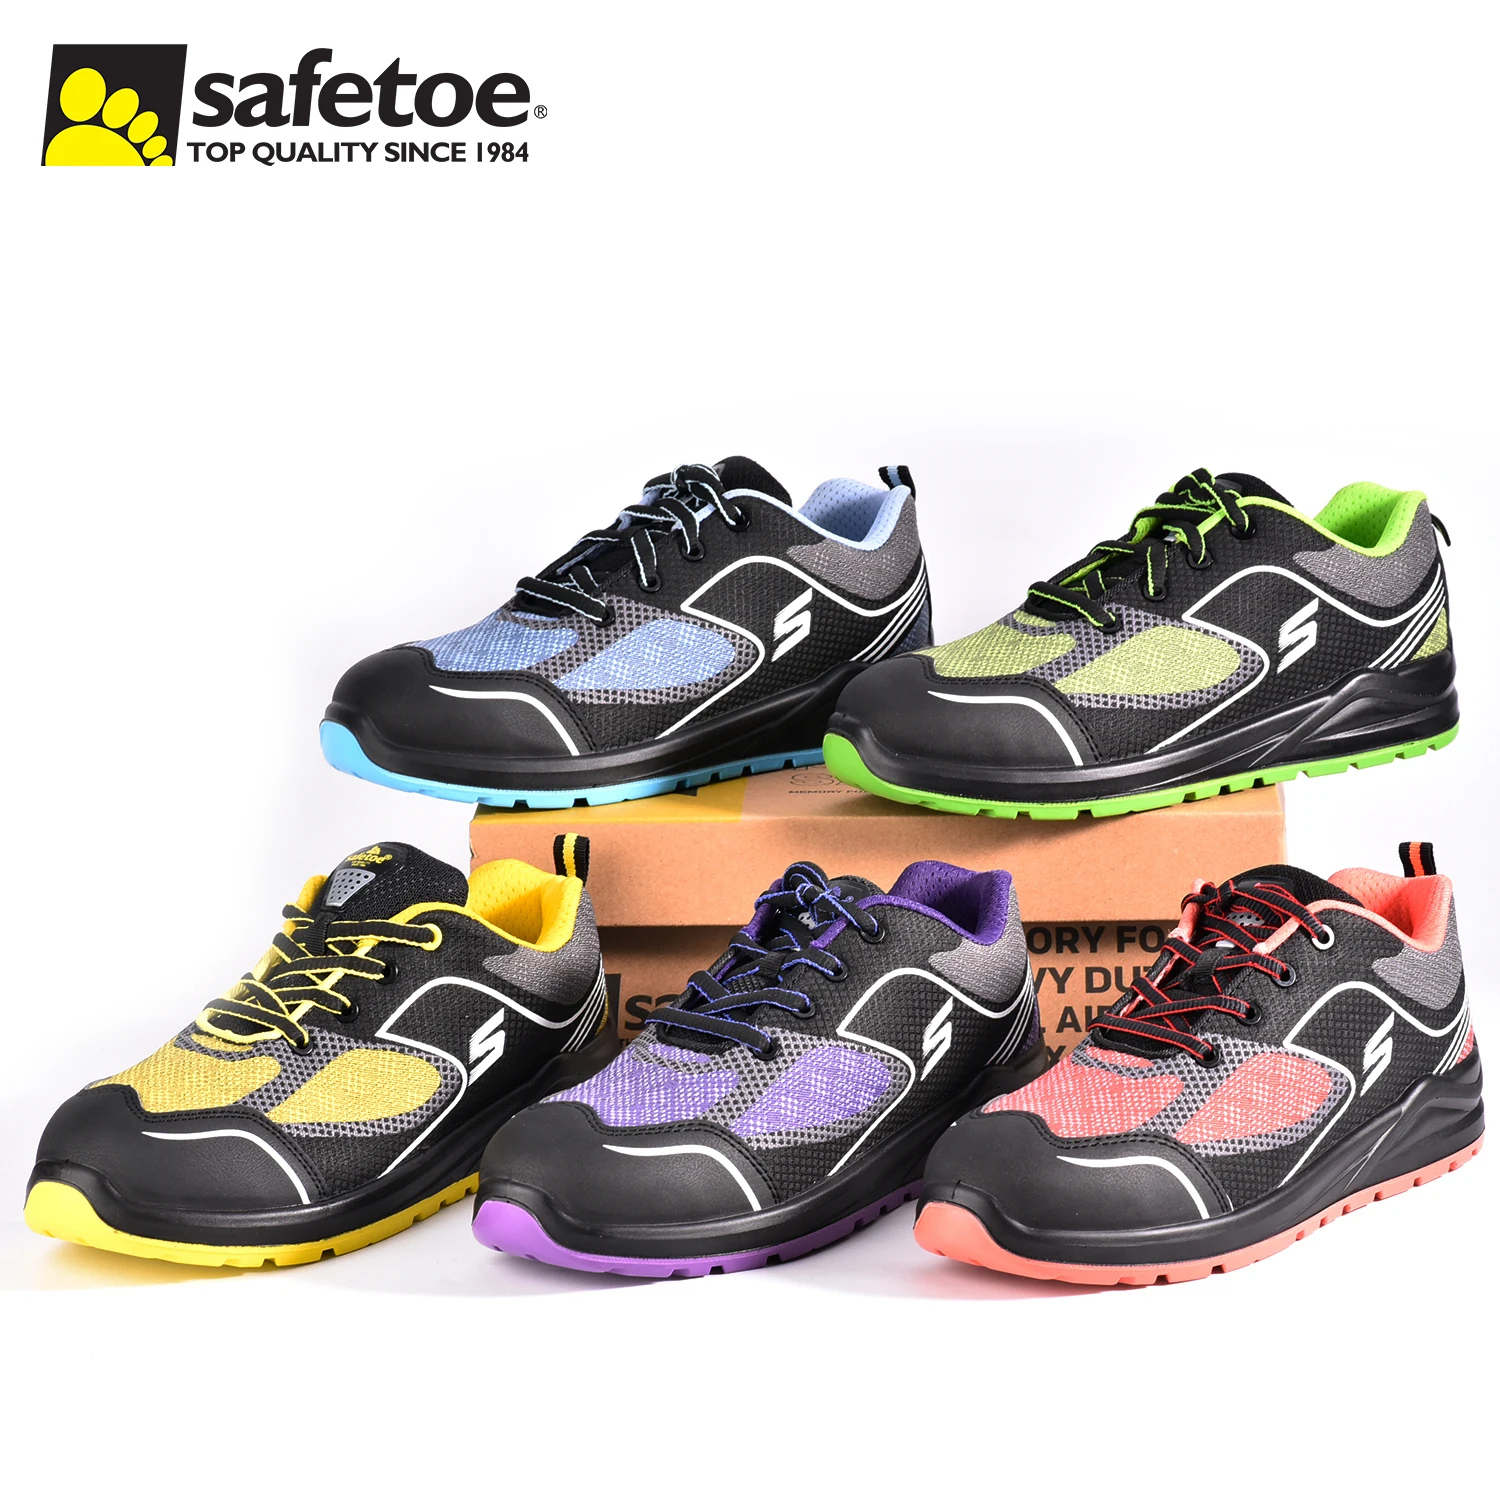 Safetoe Blue Safety Mens Work Shoes Boots Composite Toe Light Weight Breathable 